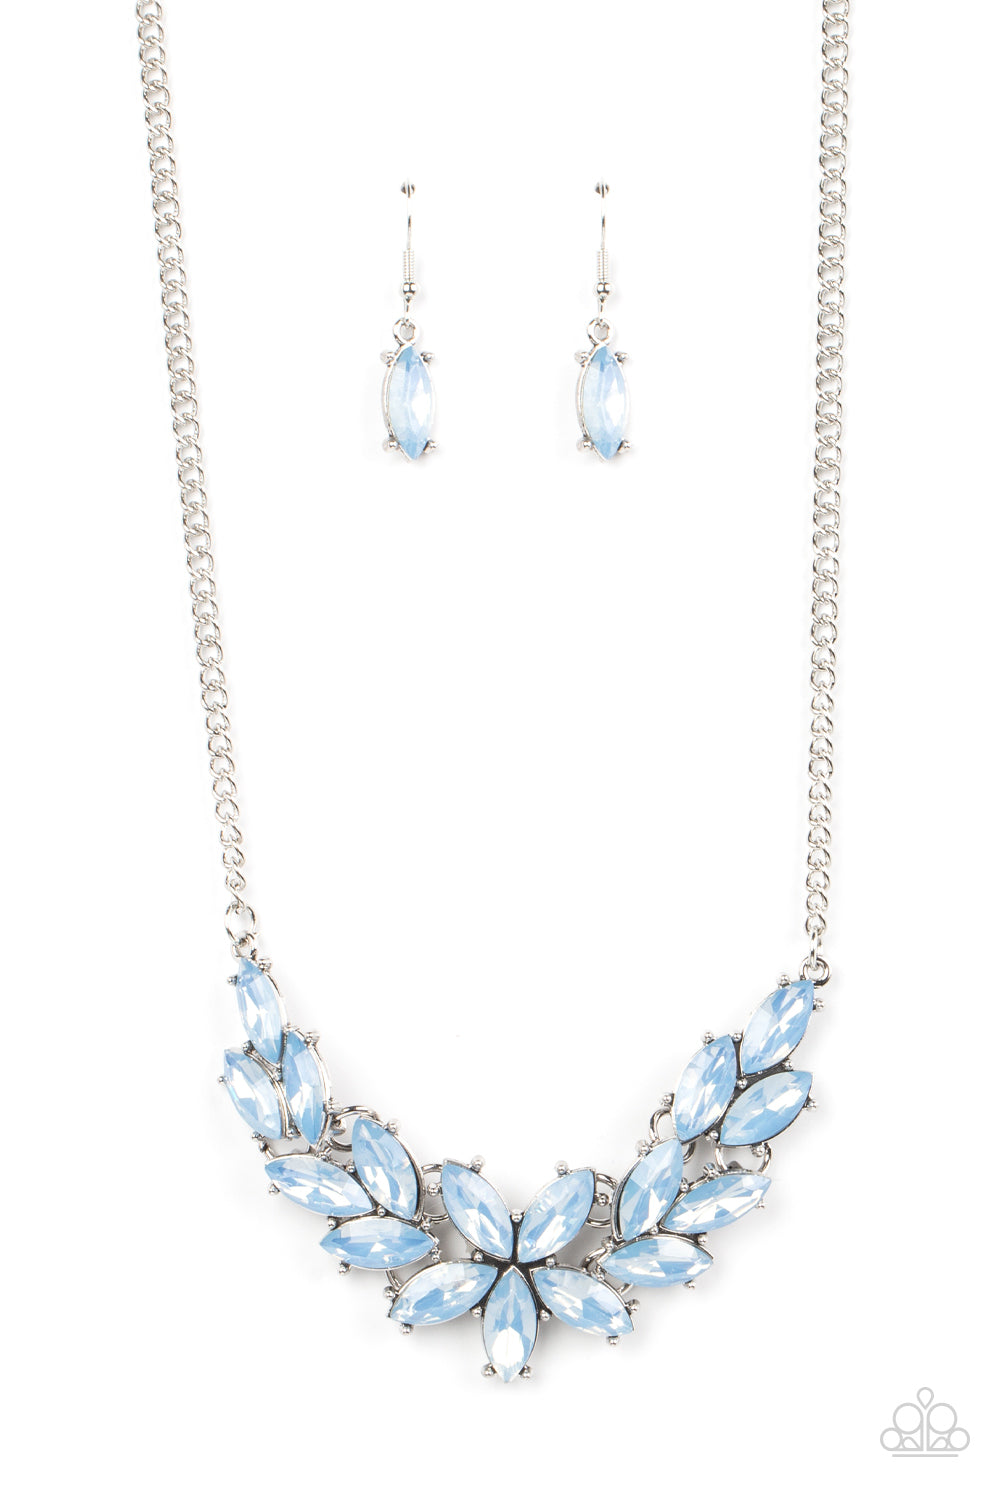 Ethereal Efflorescence - Blue Necklace - Paparazzi - Dare2bdazzlin N Jewelry